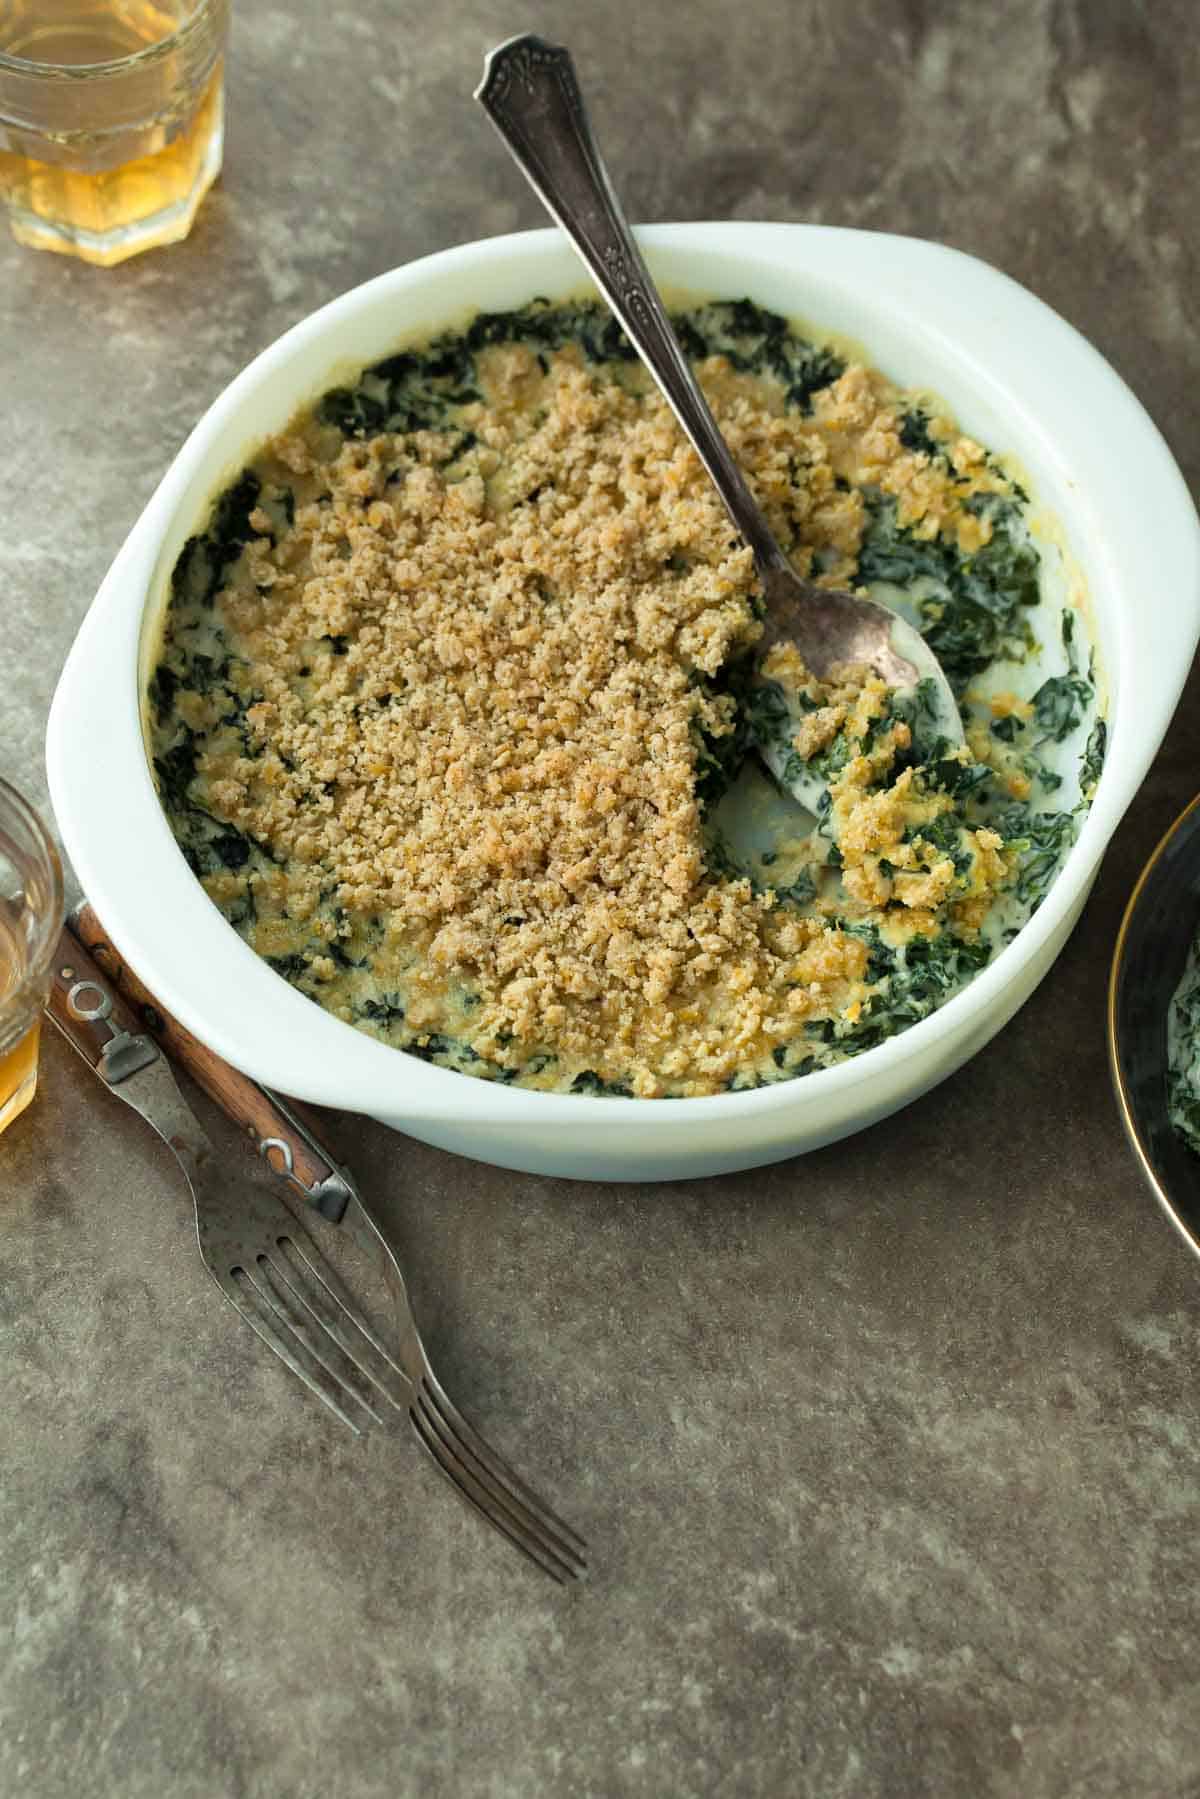 Creamed Kale in Gratin Dish with Spoon